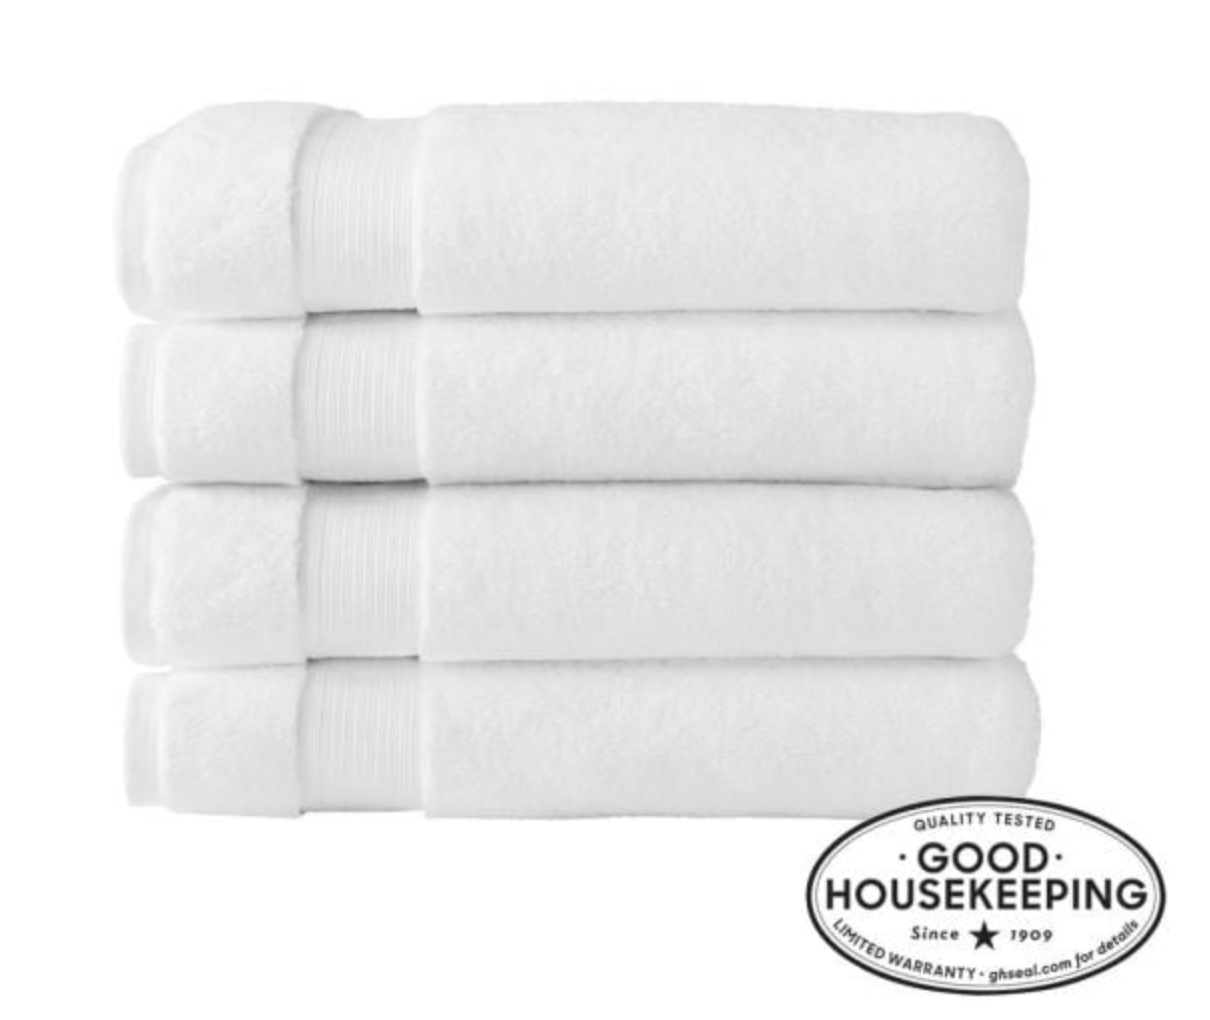 Exclusive Black Friday Savings Home Decorators Collection Egyptian Cotton Bath Sheet in White (Set of 4)